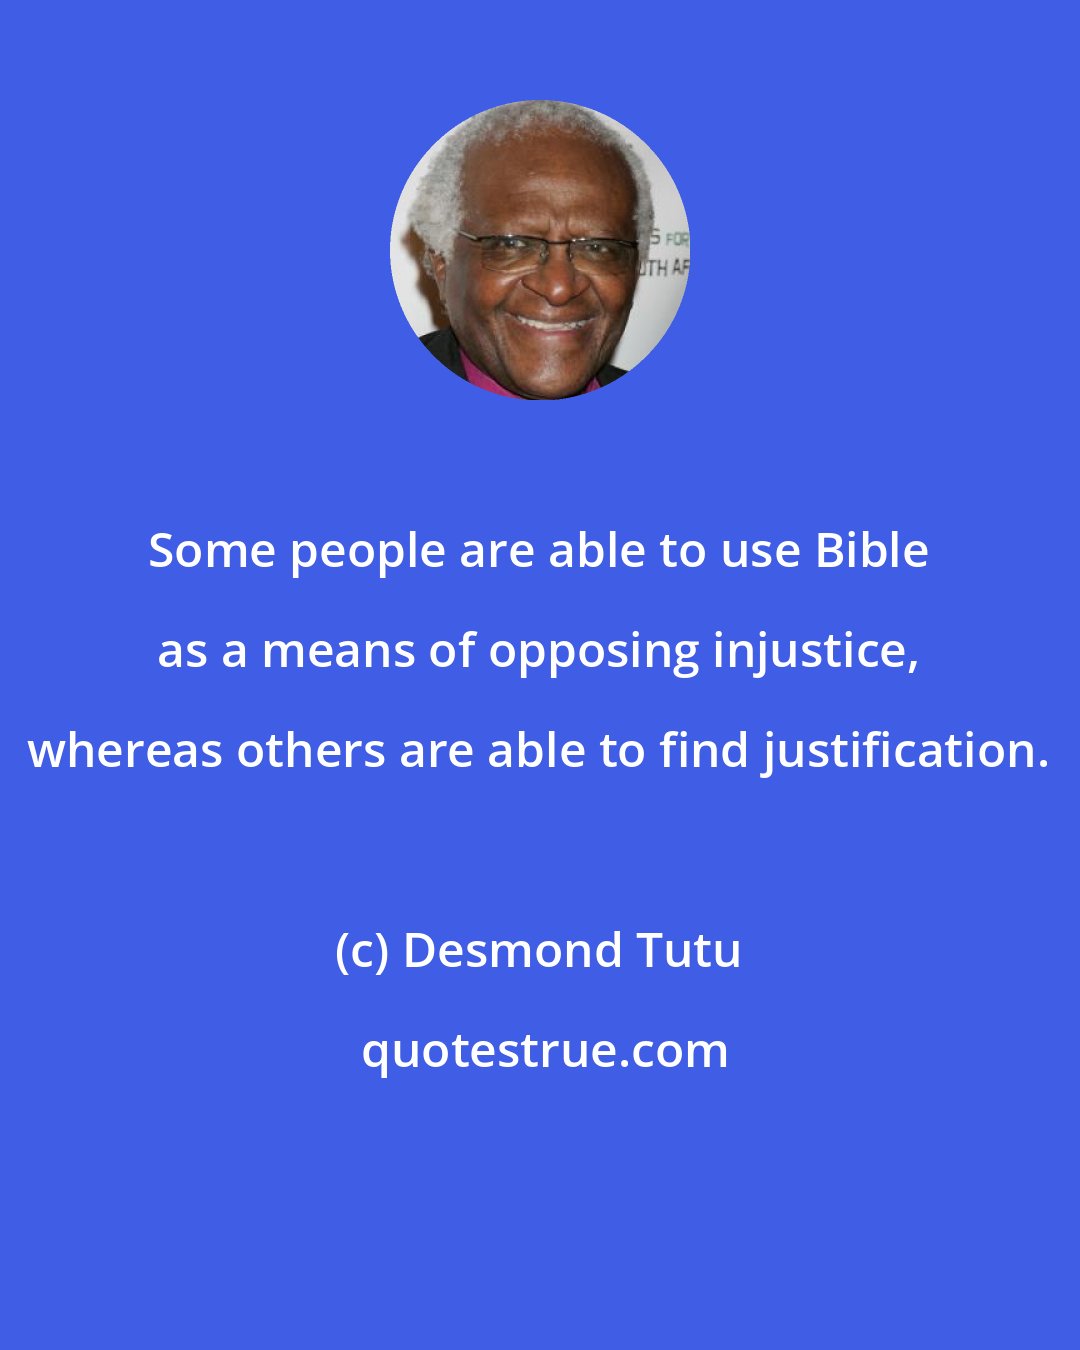 Desmond Tutu: Some people are able to use Bible as a means of opposing injustice, whereas others are able to find justification.